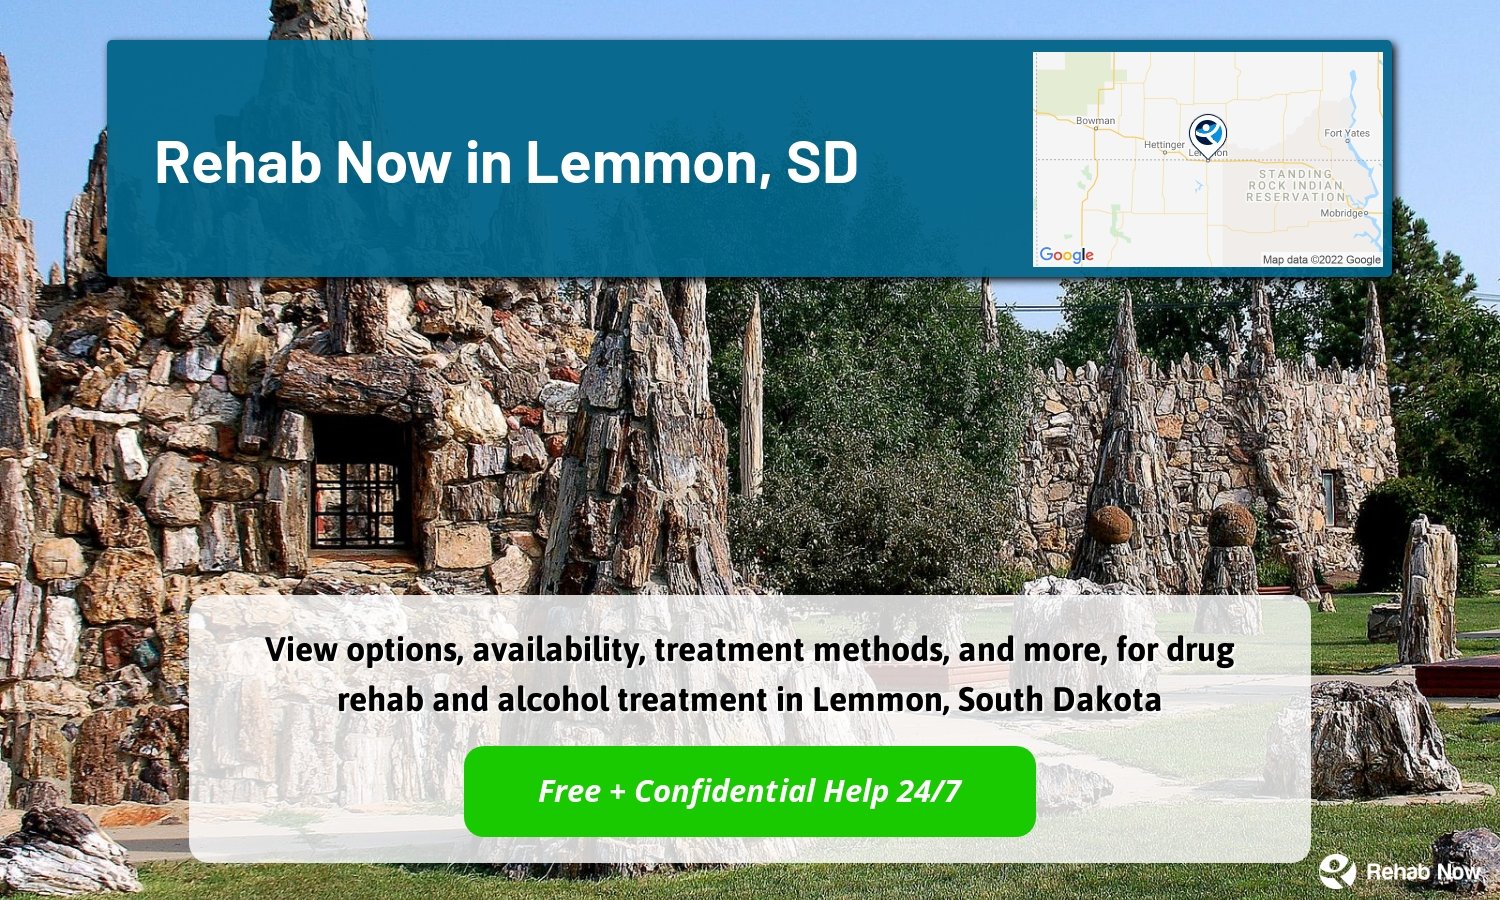 View options, availability, treatment methods, and more, for drug rehab and alcohol treatment in Lemmon, South Dakota